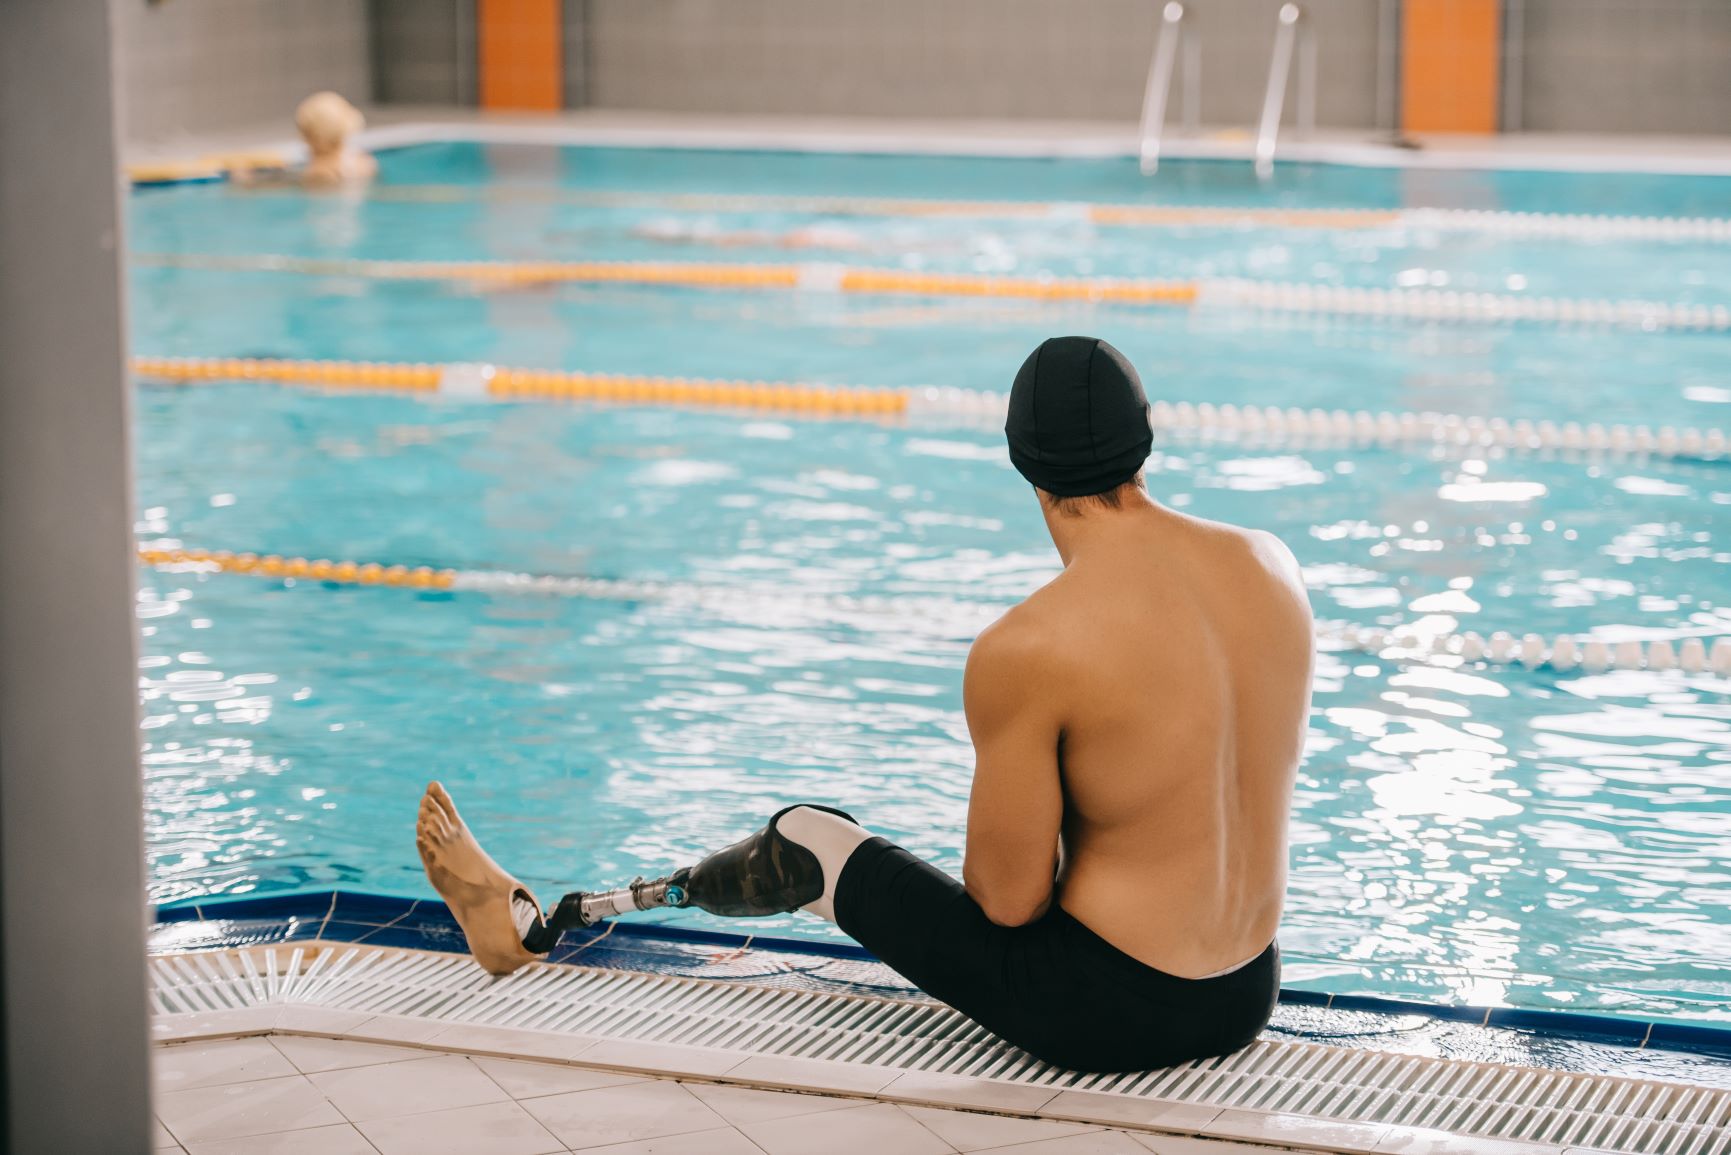 Rear view of young swimmer with artificial leg sitting on poolside of indoor swimming pool